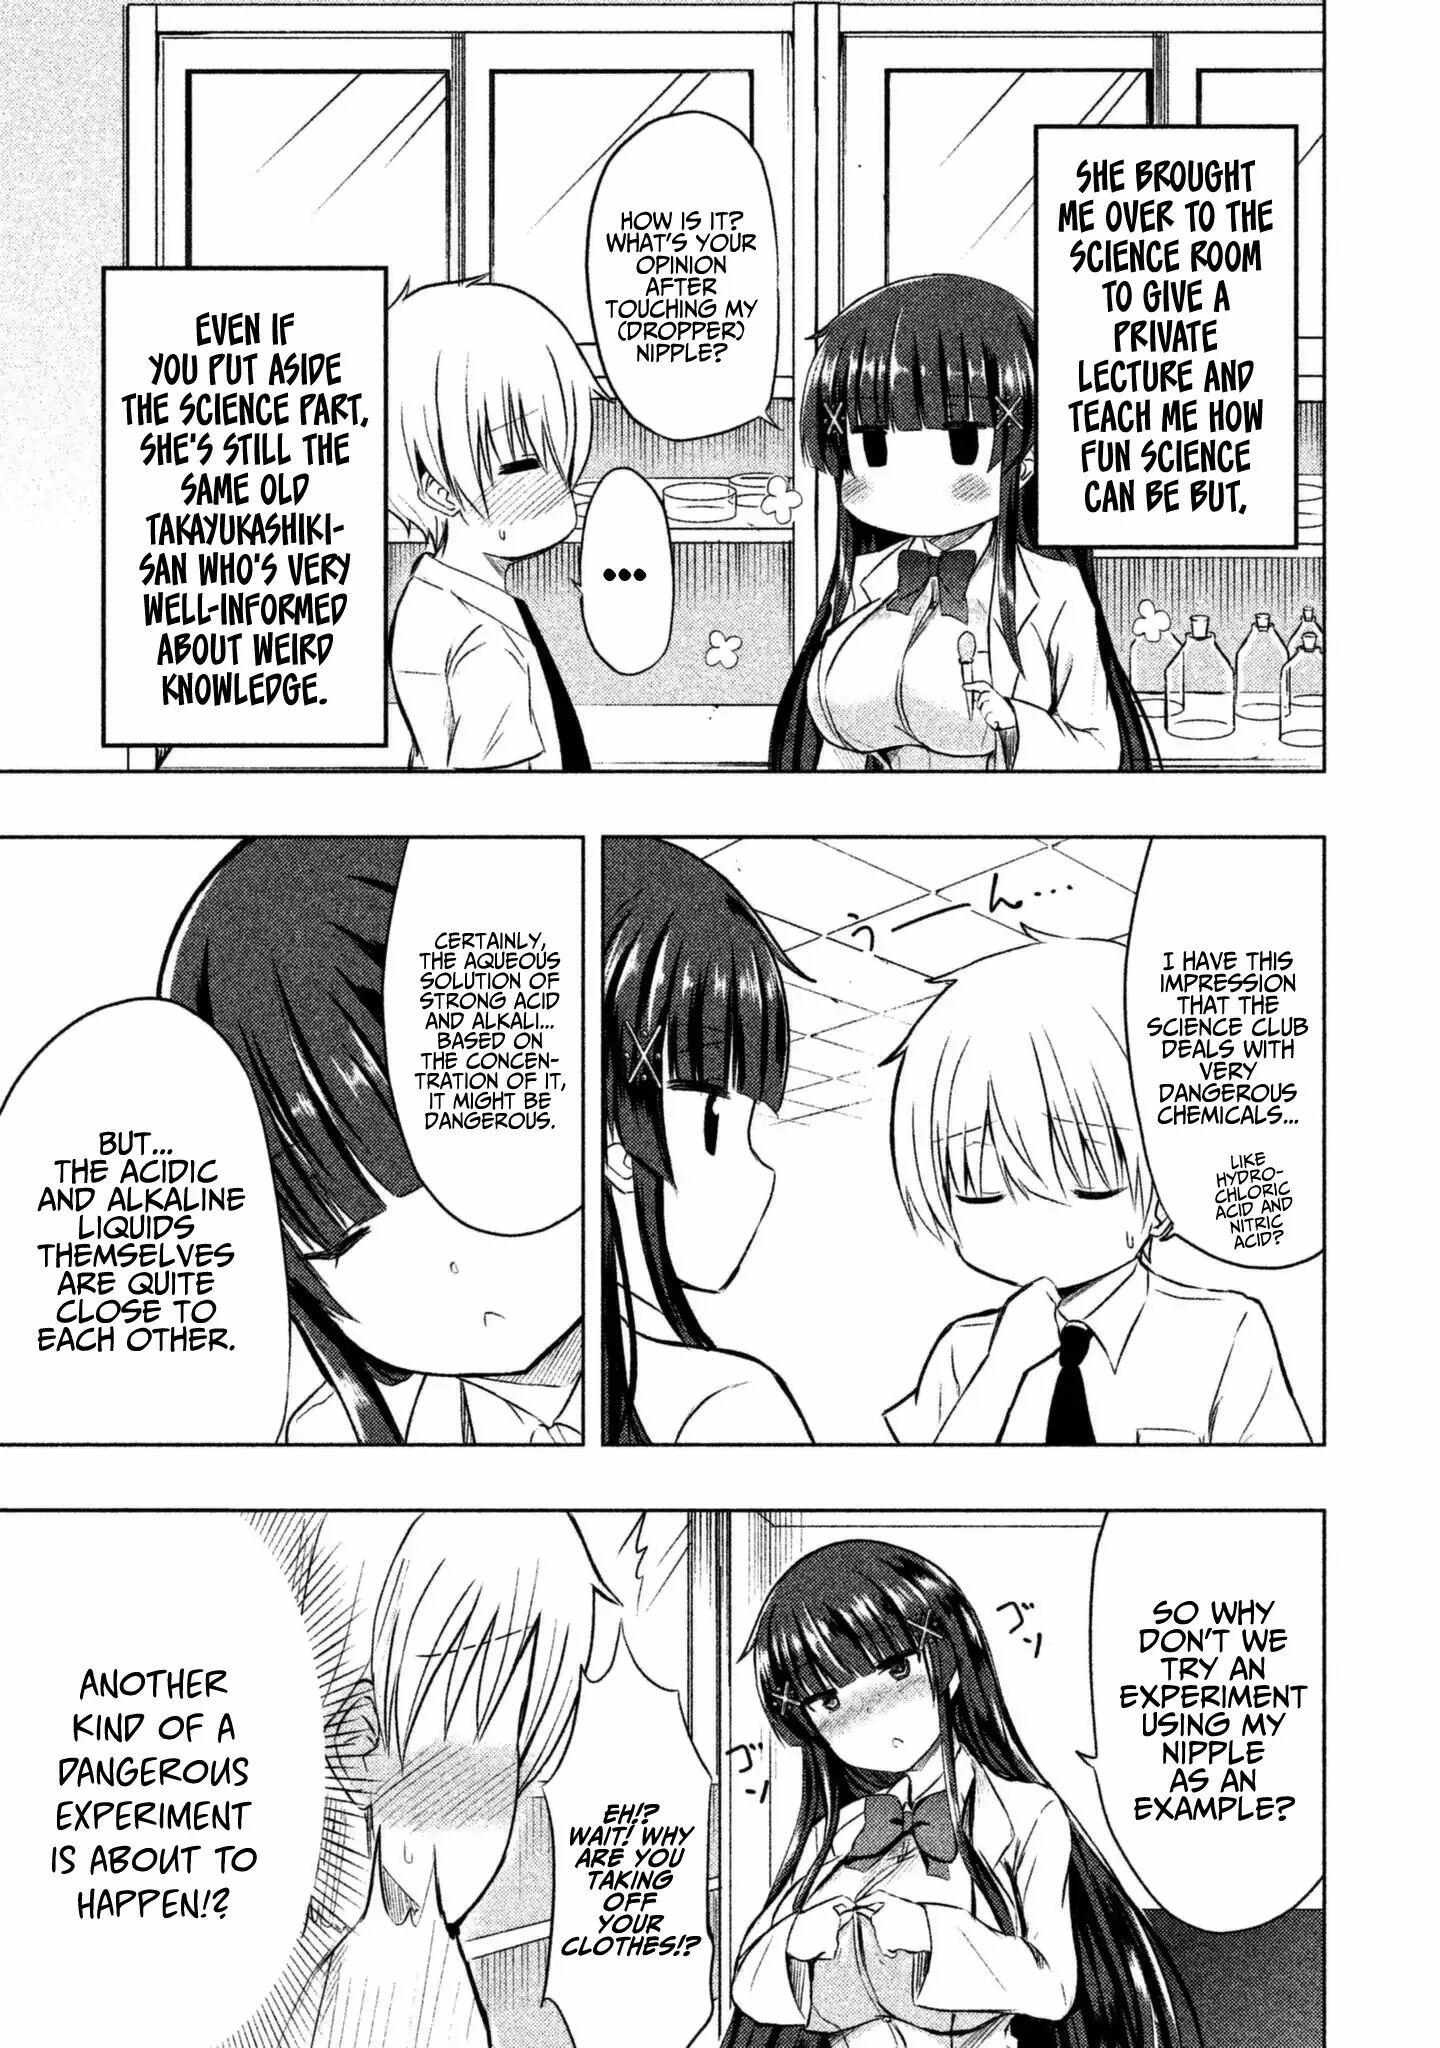 A Girl Who Is Very Well-Informed About Weird Knowledge, Takayukashiki Souko-San Vol.1 Chapter 9: Science Club page 4 - Mangakakalots.com